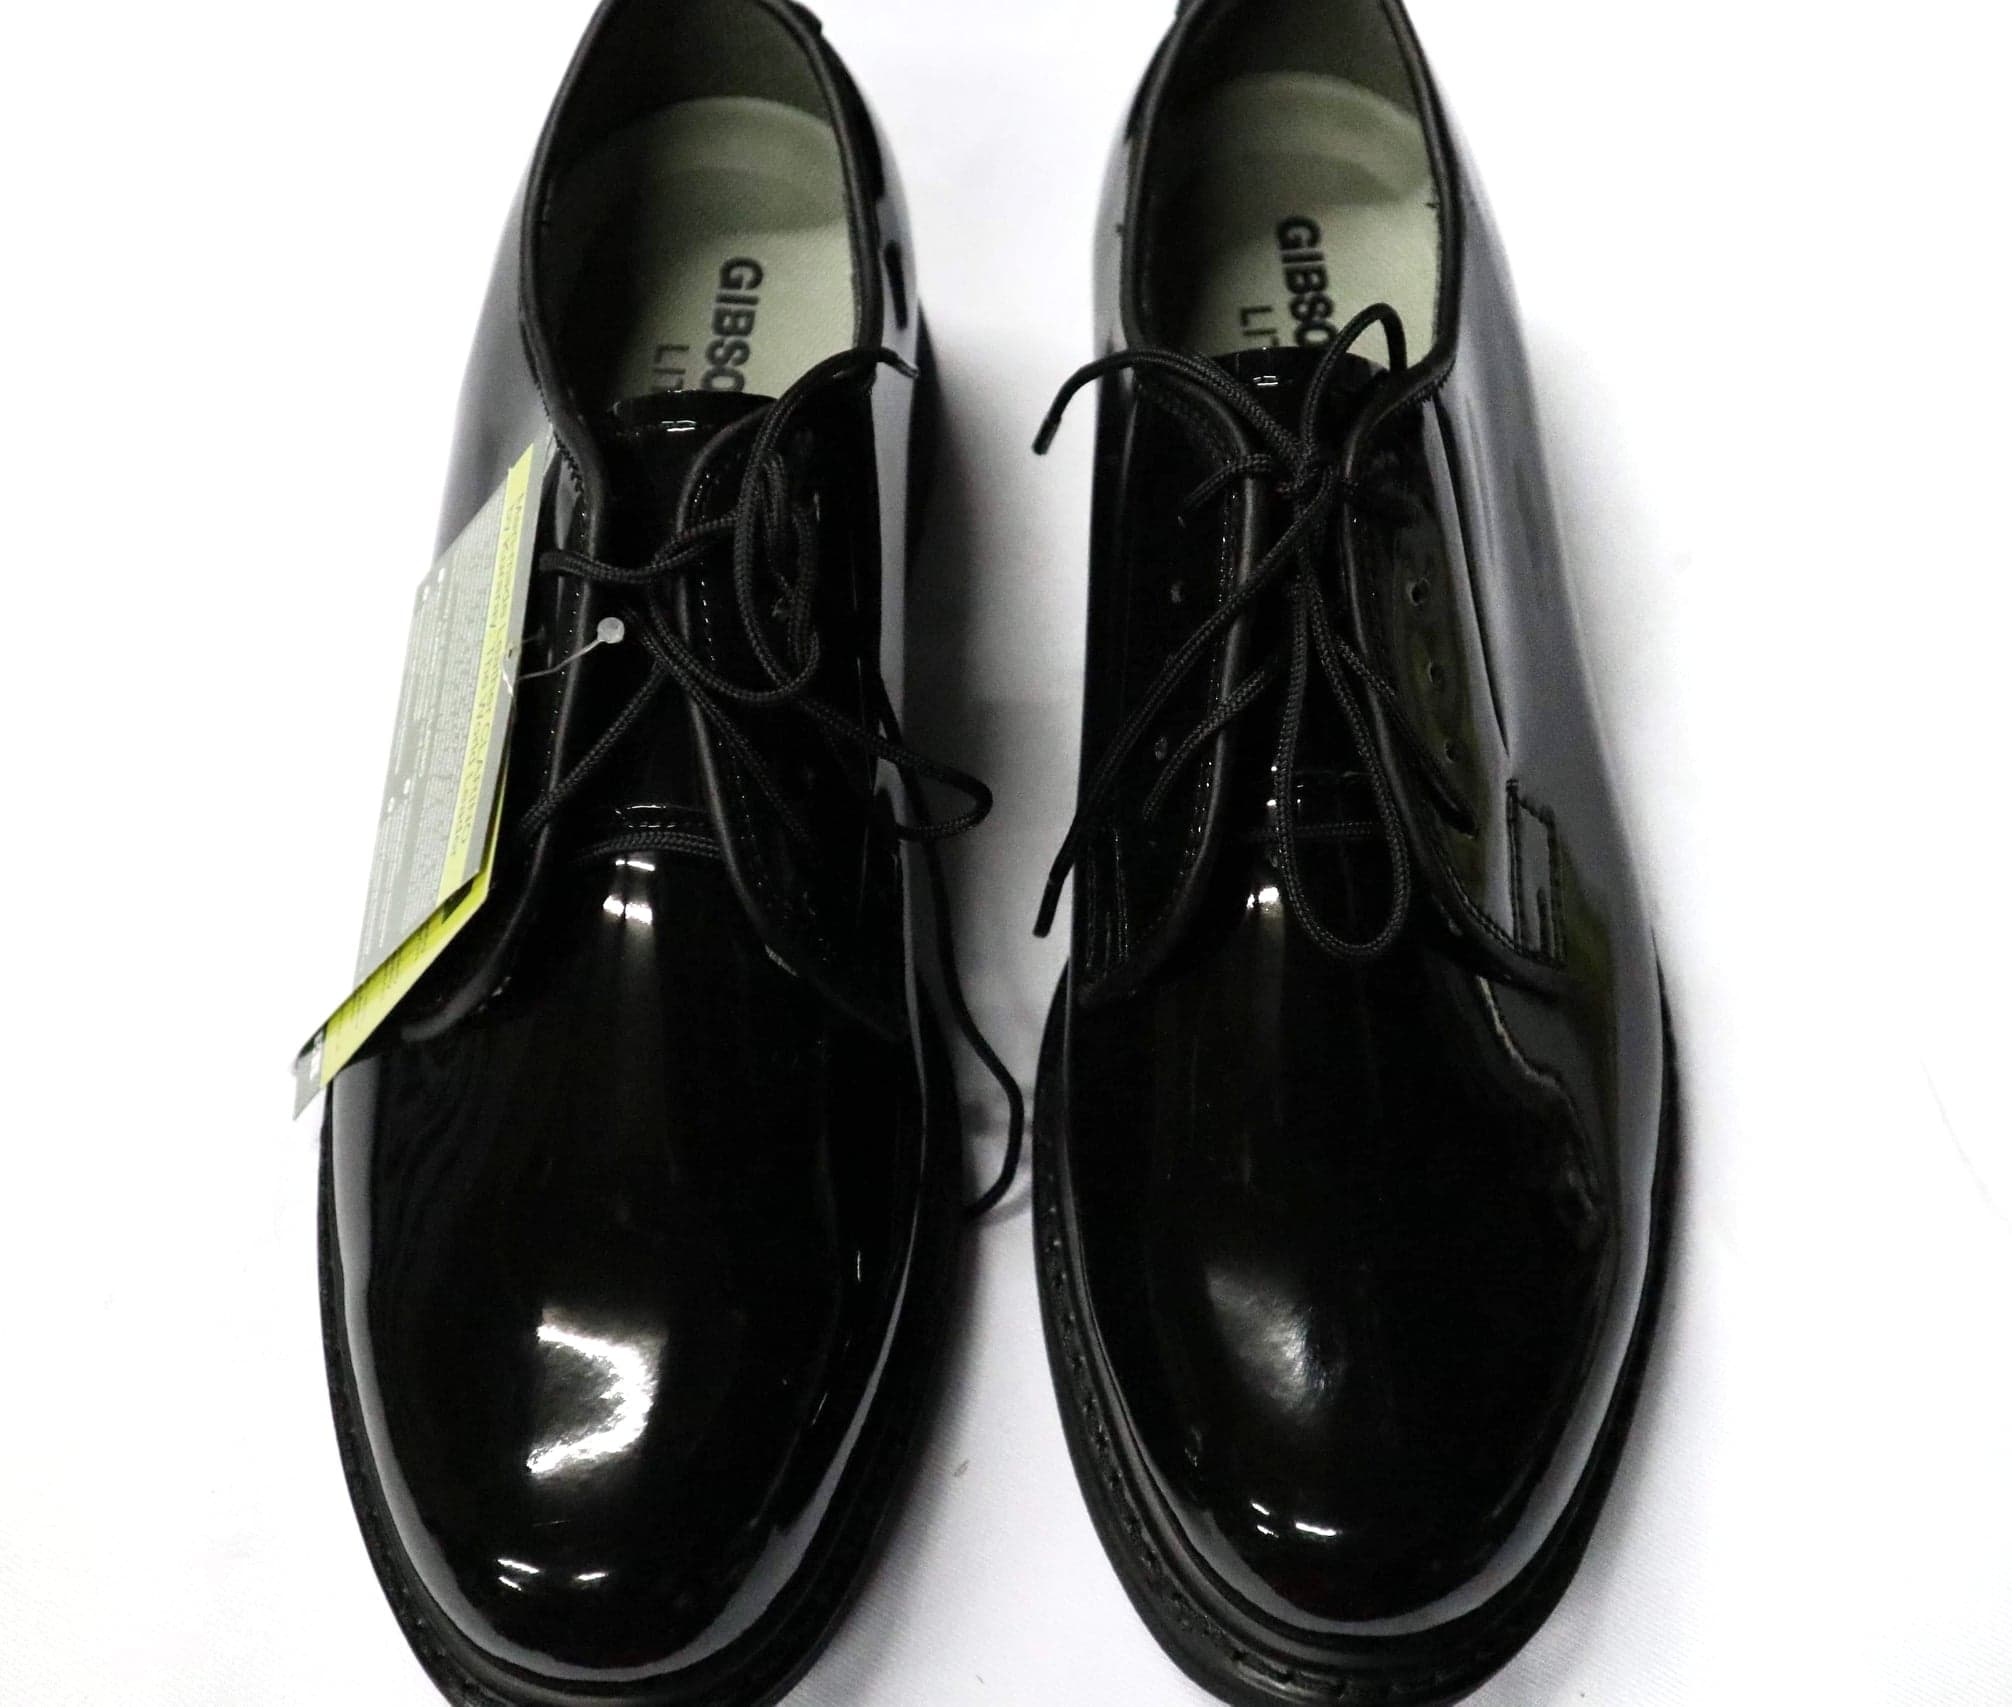 gibson charol shoes price